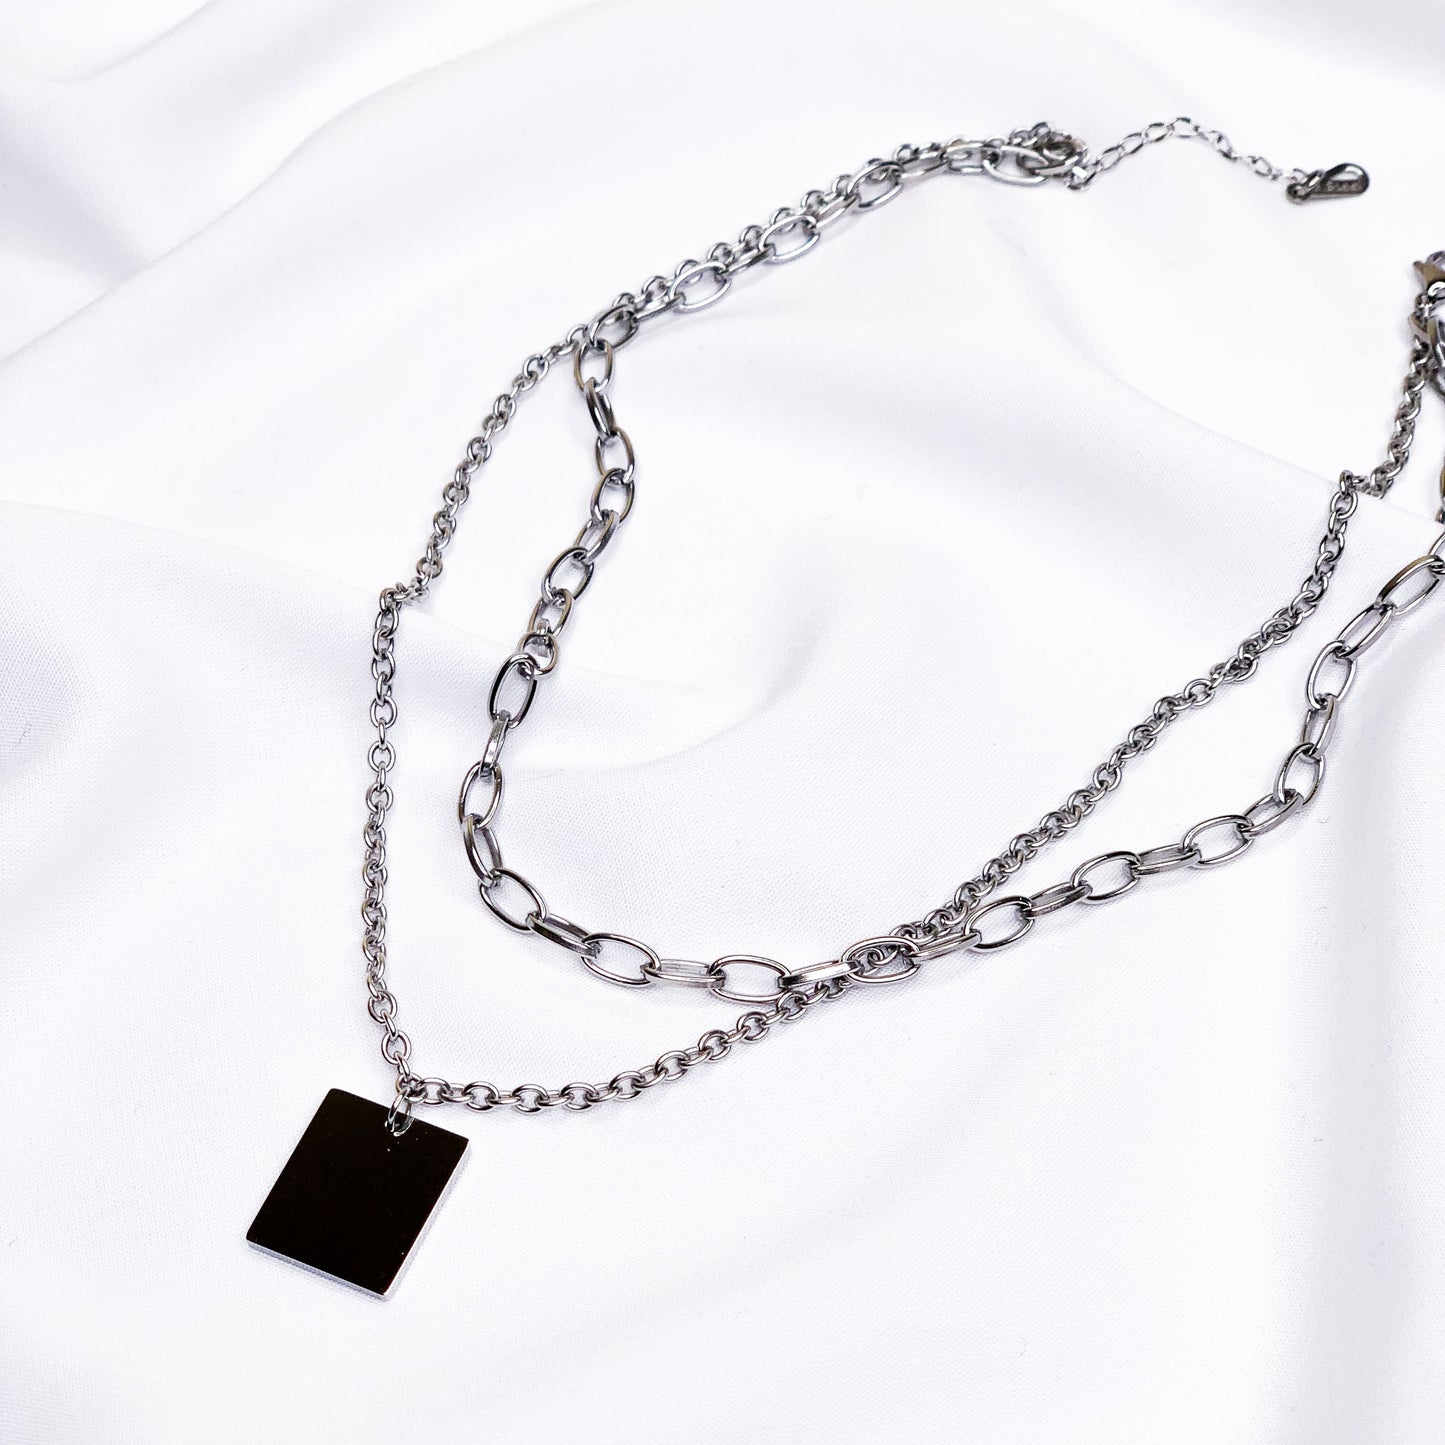 Steel chain choker necklace with square pendant